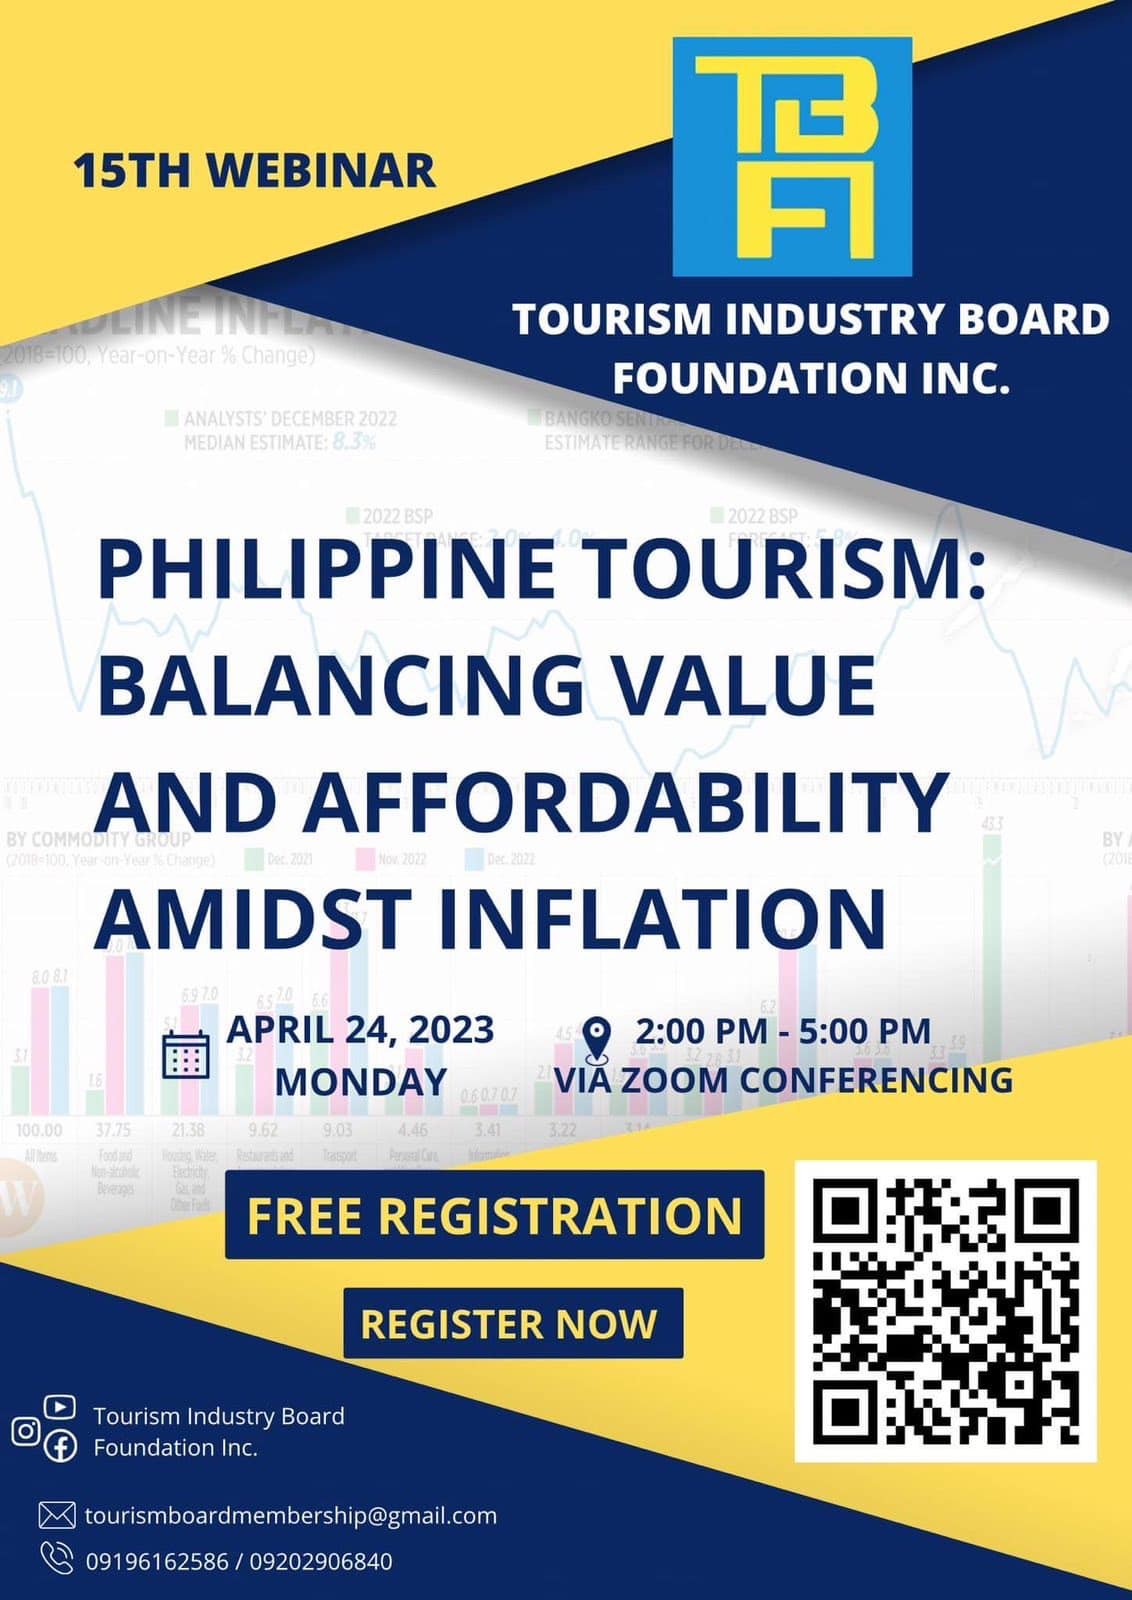 PHILIPPINE TOURISM: Balancing Value and Affordability Amidst Inflation (April 24, 2013)